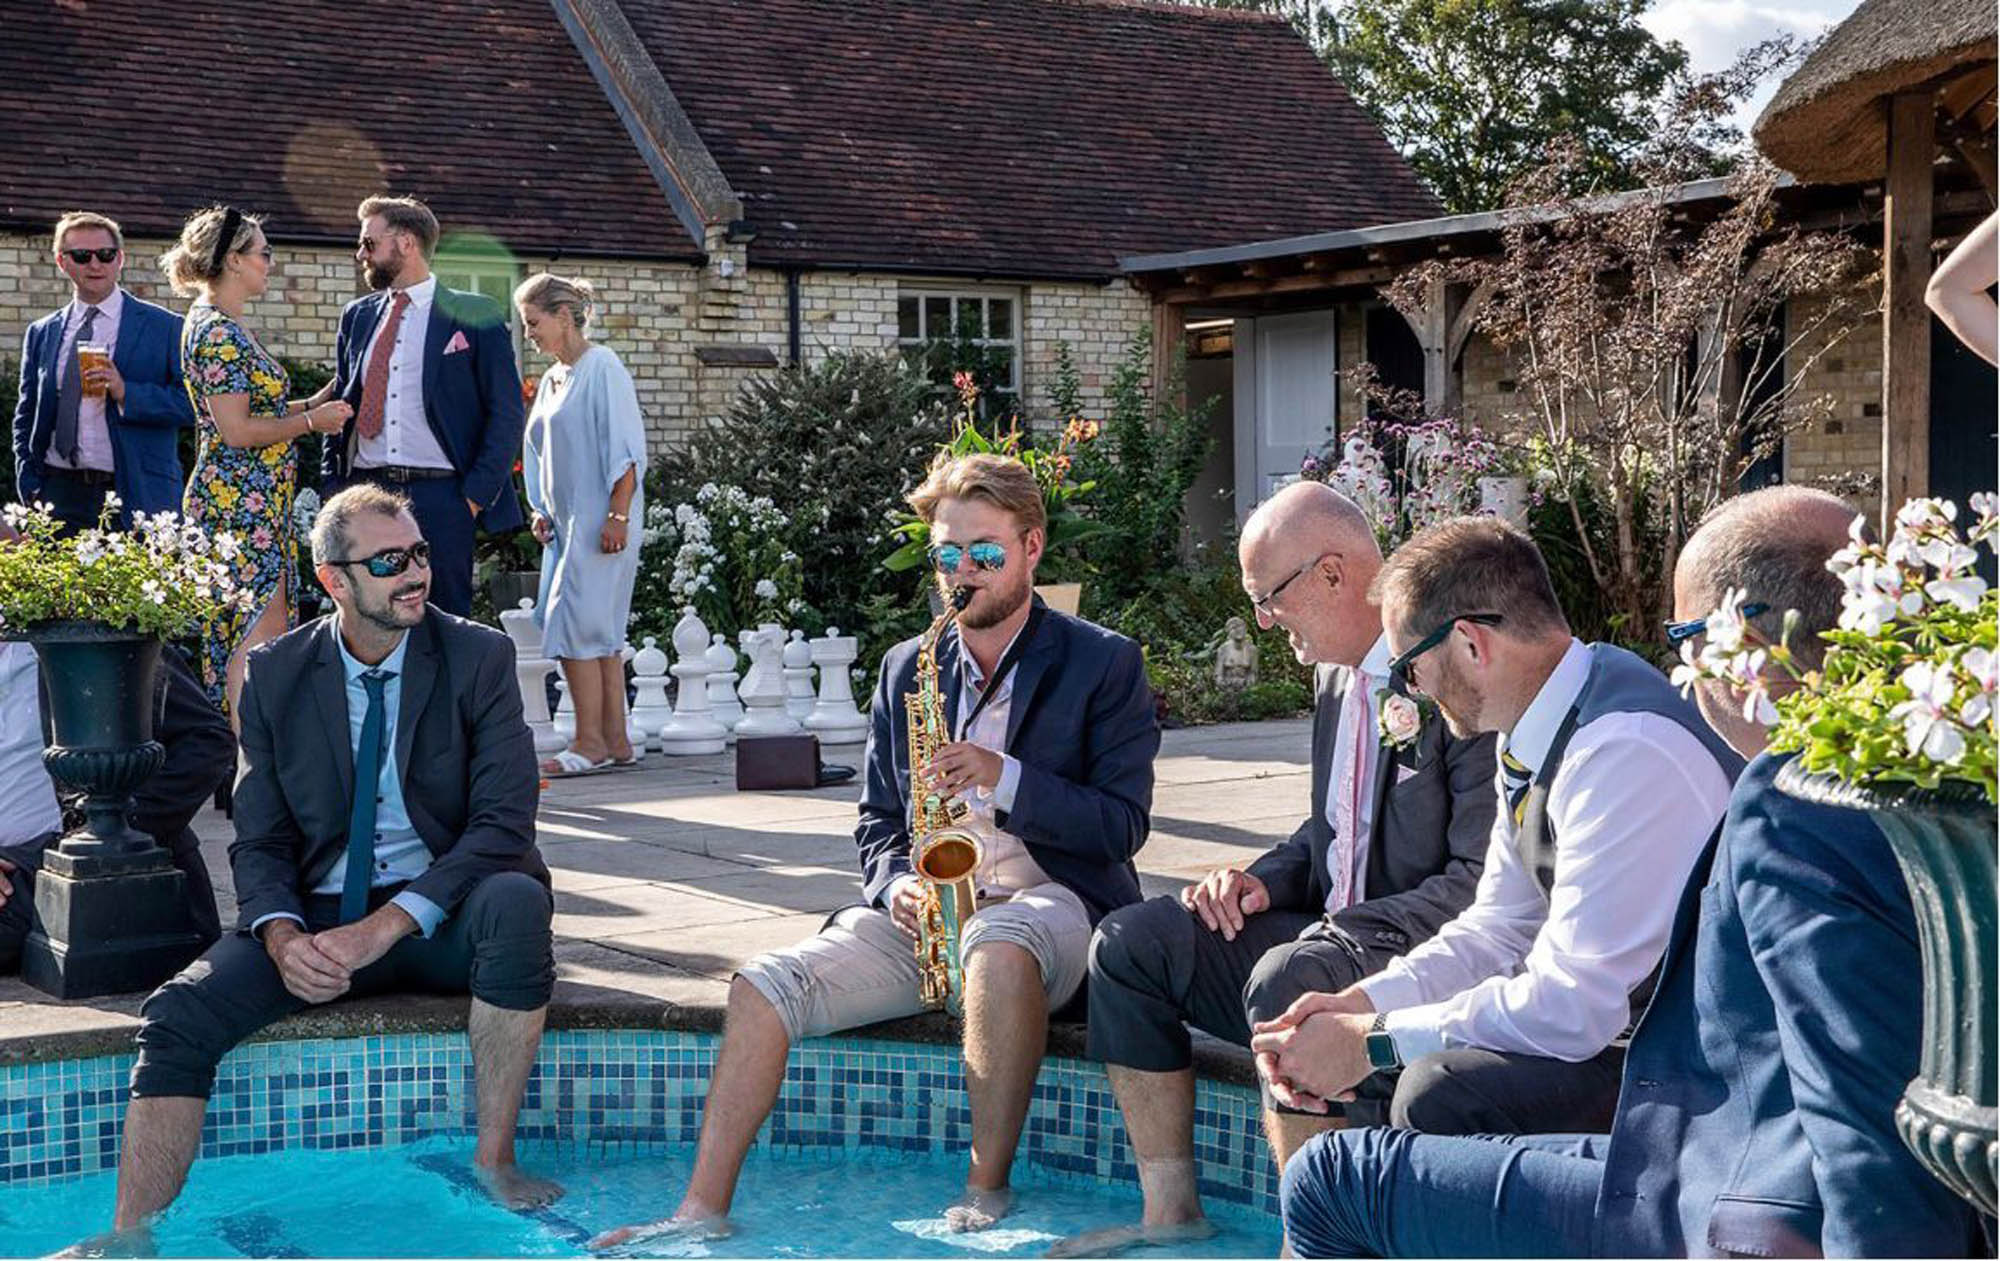 Bedfordshire manor house wedding venue Shortmead guests dipping toes in pool